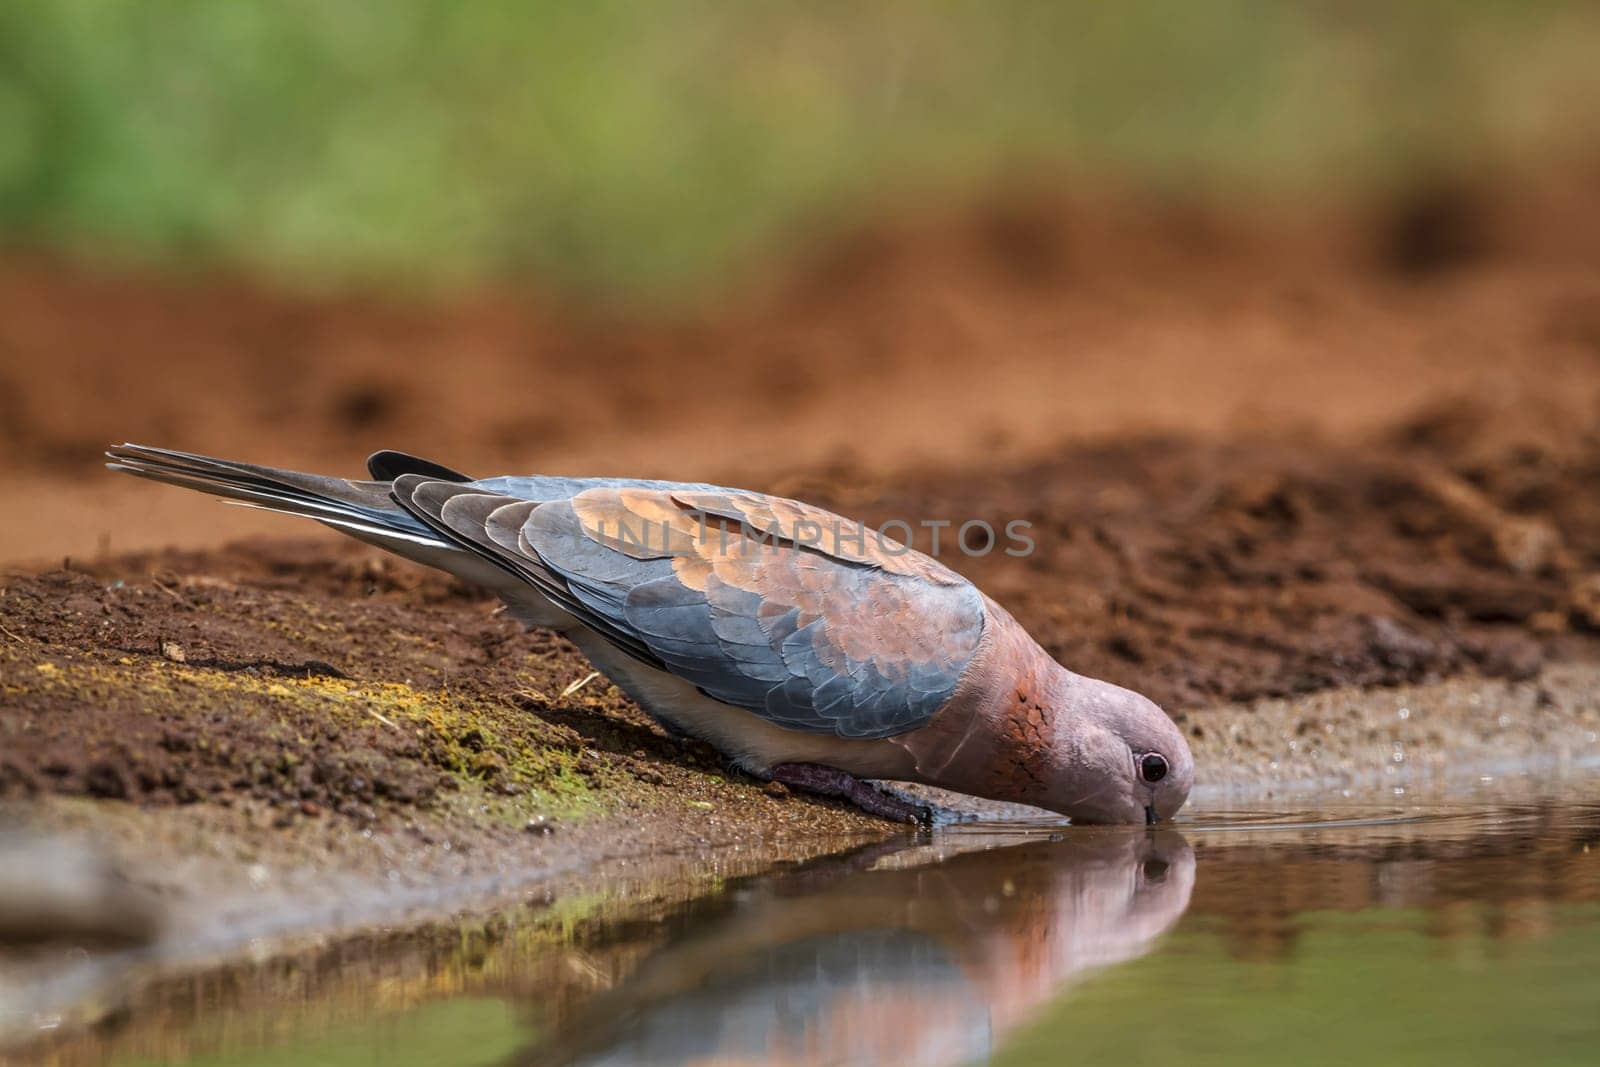 Laughing Dove drinking at waterhole in Kruger National park, South Africa ; Specie Streptopelia senegalensis family of Columbidae